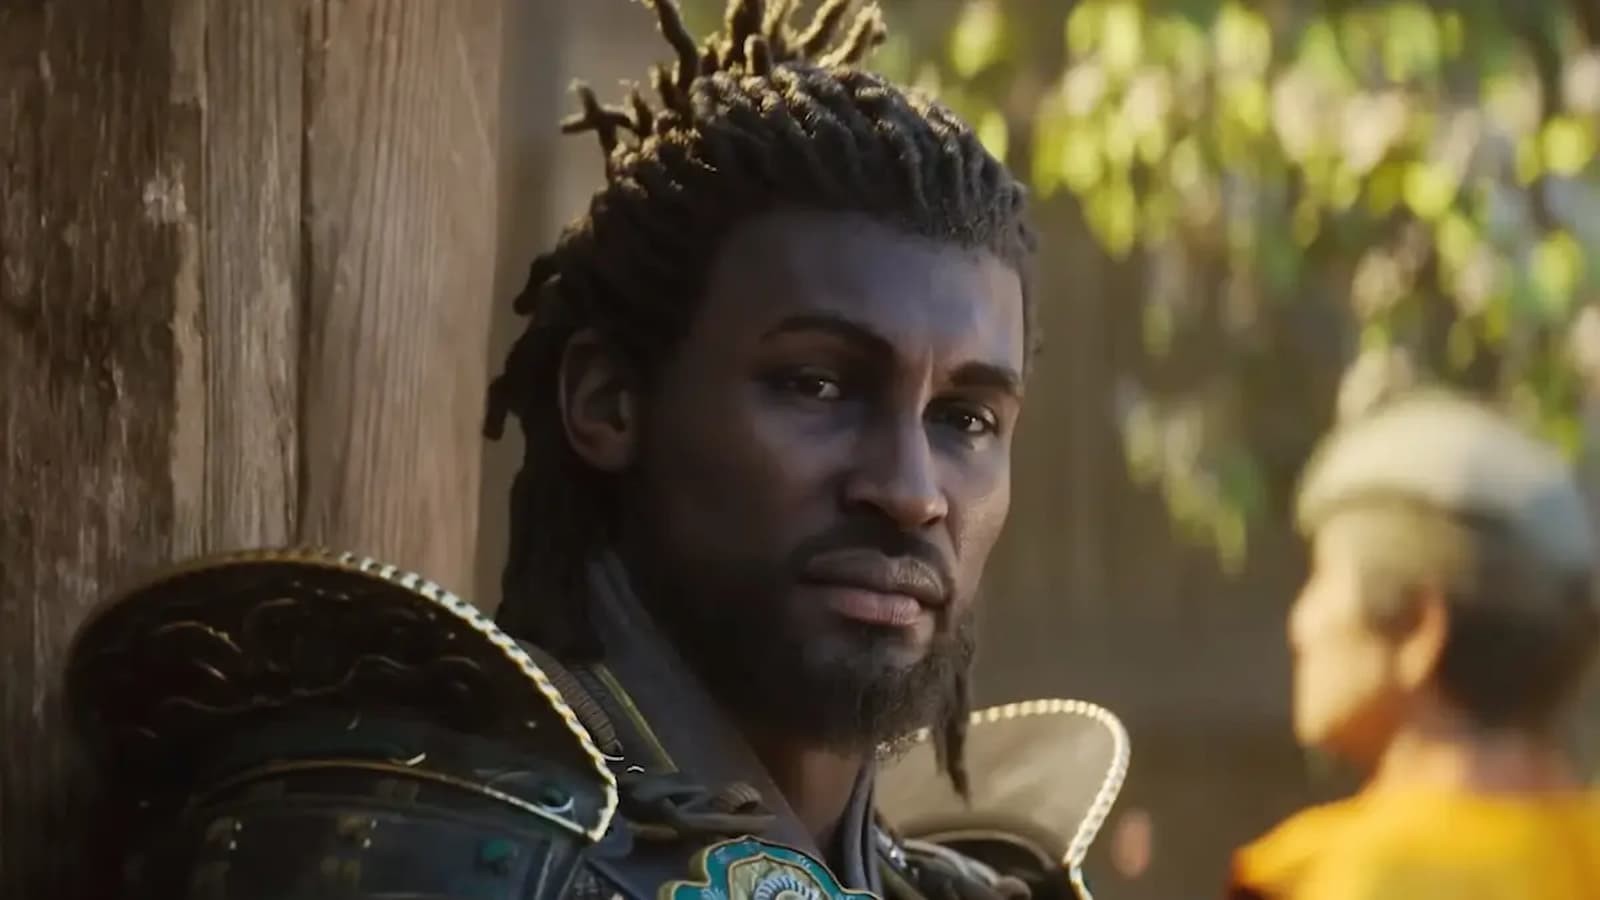 Yasuke from Assassin's Creed Shadows has been a controversial figure. Image via Ubisoft